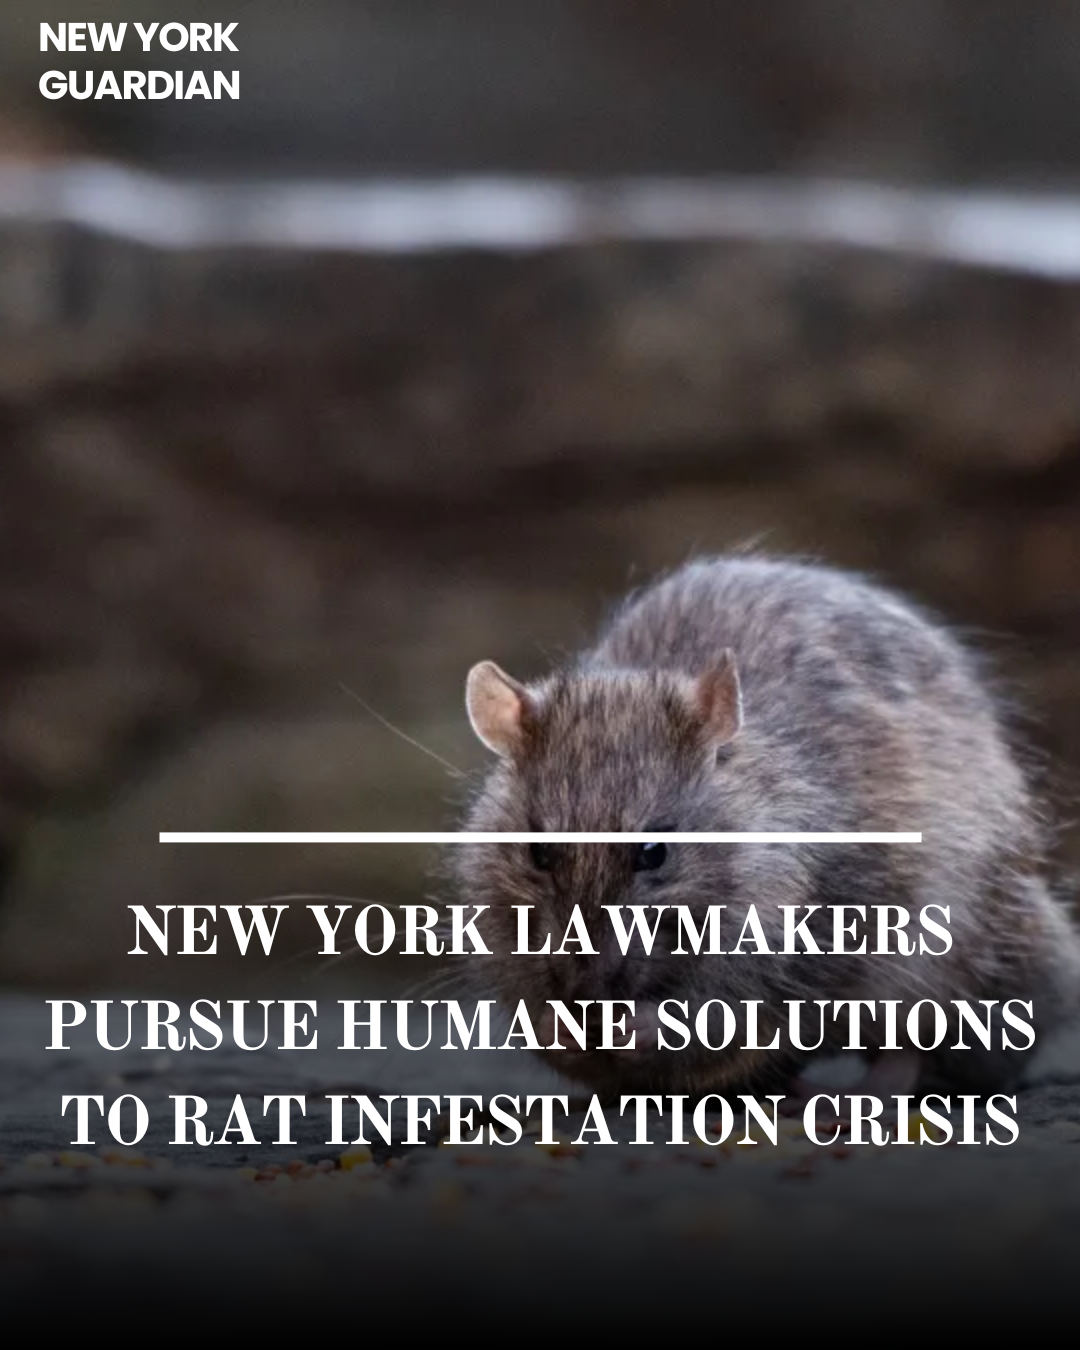 New York lawmakers are proposing novel solutions to address the long-standing problem of rat infestation.